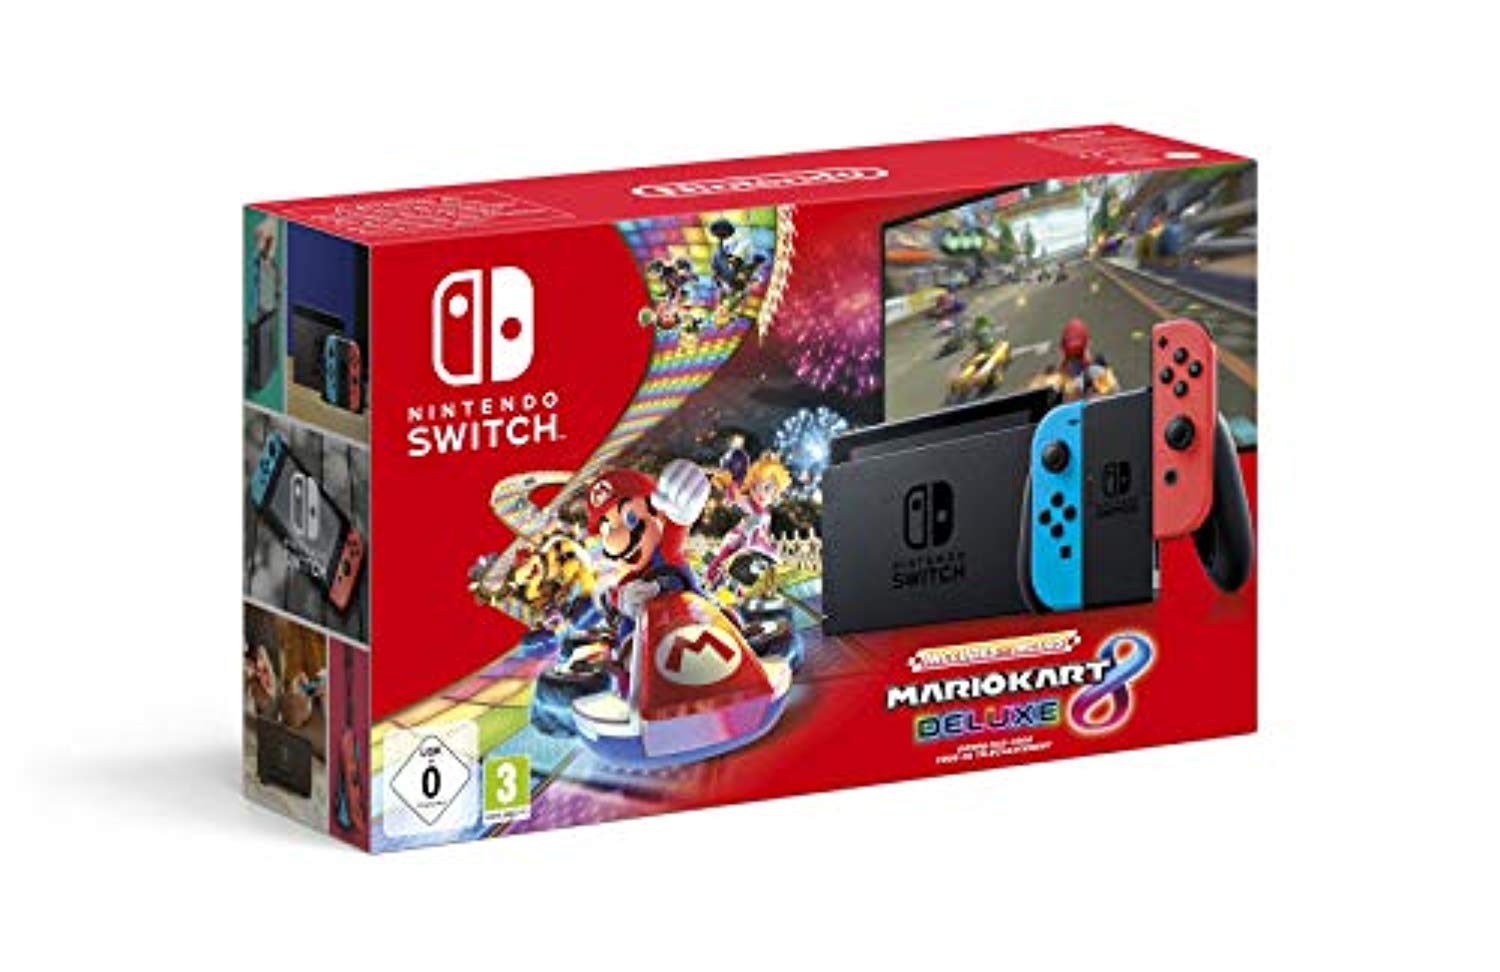 Nintendo Switch (Neon Red/Neon Blue) with Mario Kart 8 Deluxe - Offer Games